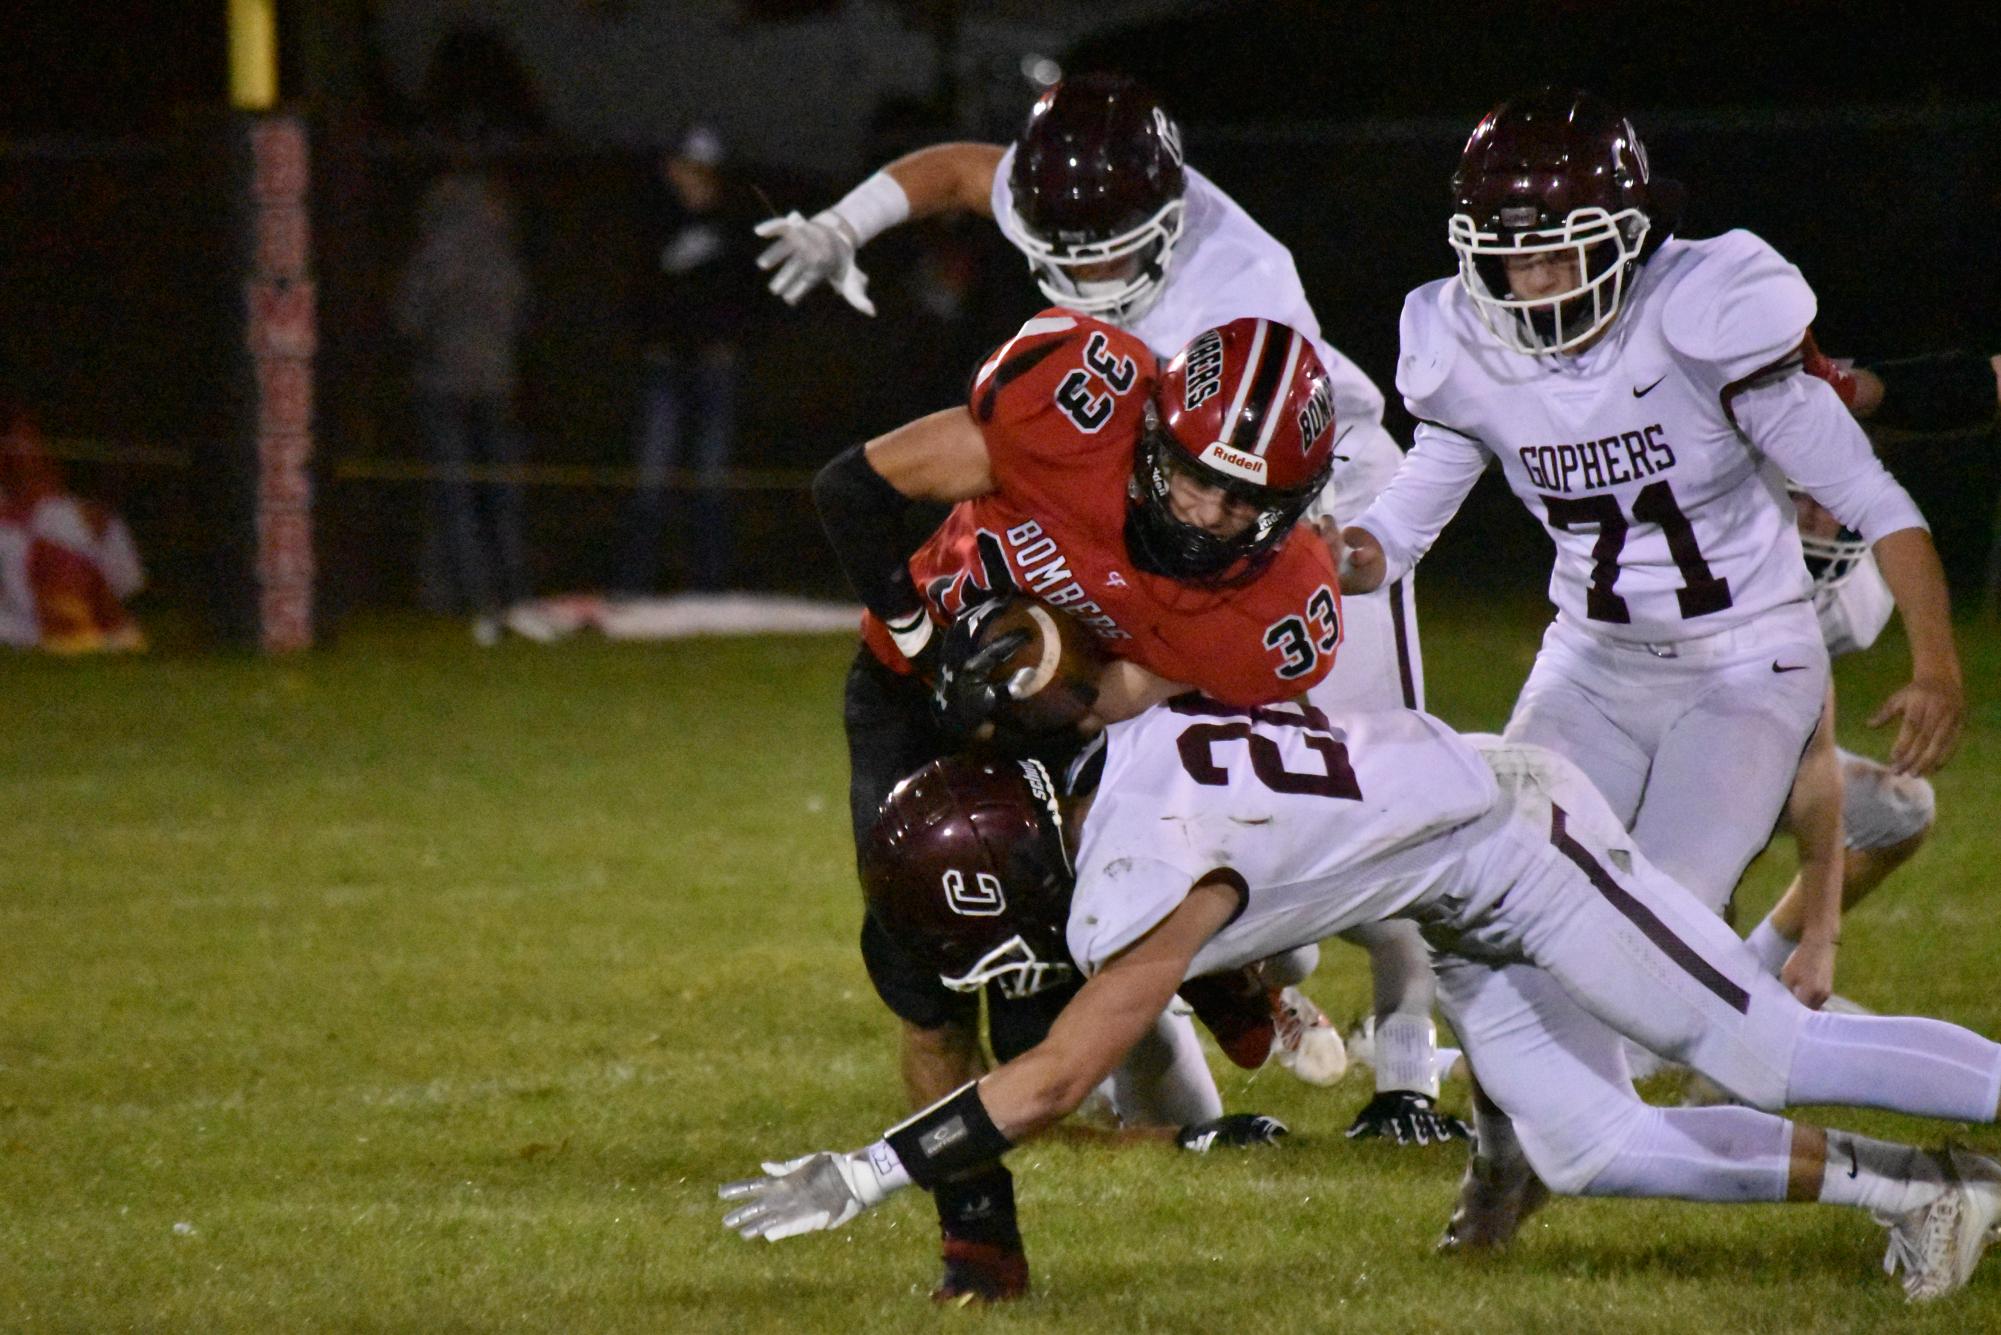 Calvin Singewald carries the ball and bulldozes through the competition.